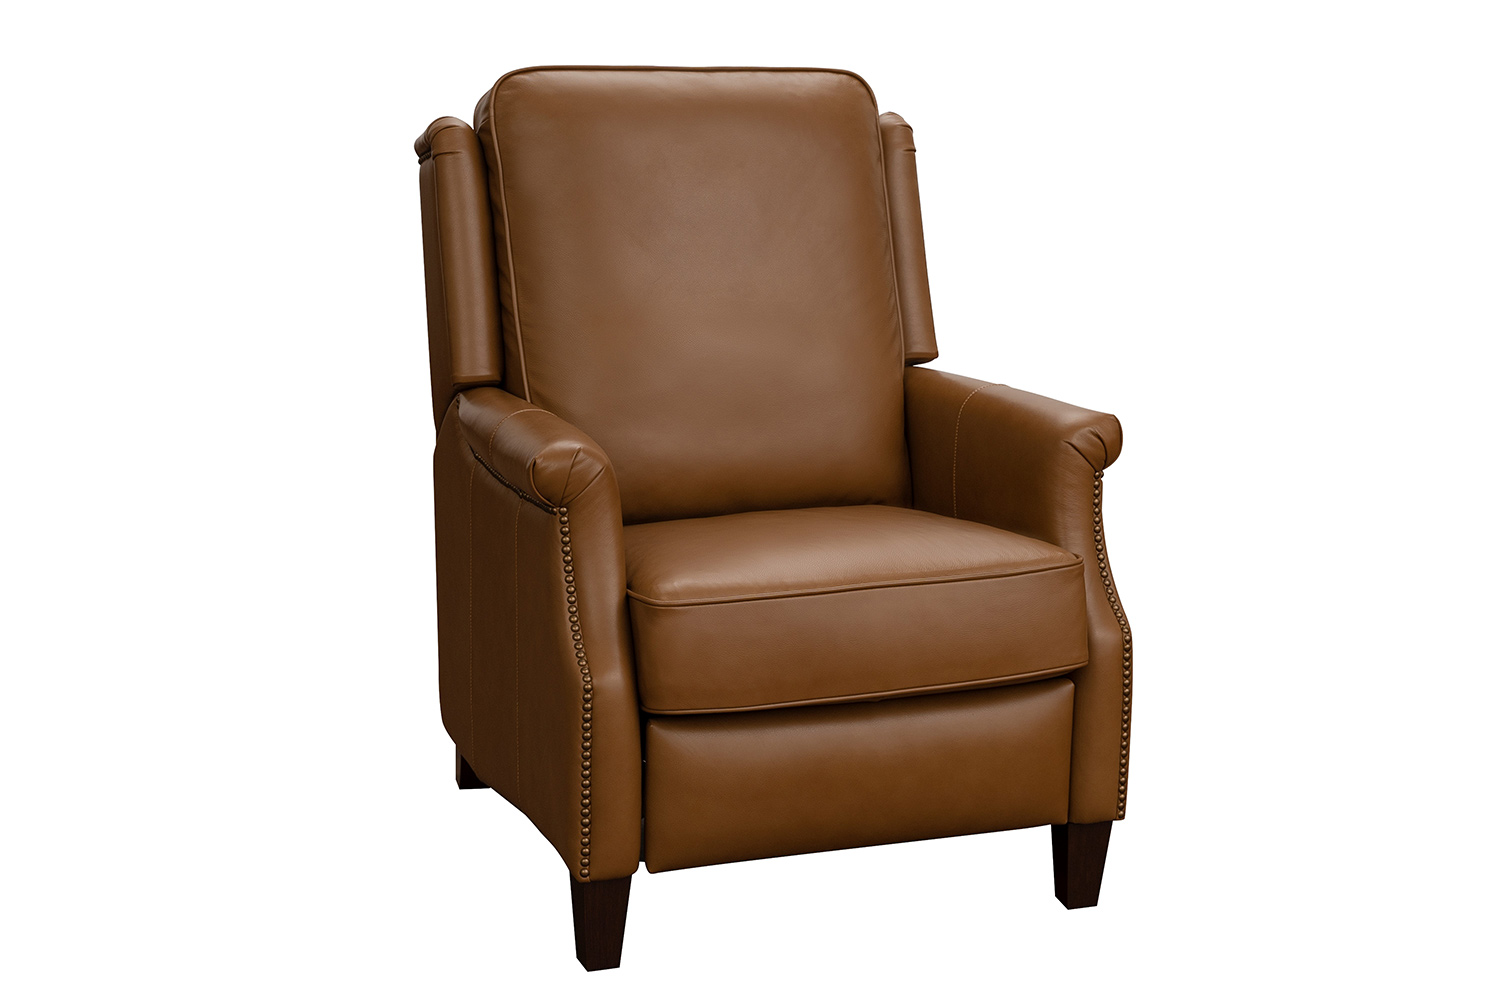 Barcalounger Riley Recliner Chair - Shoreham Ponytail/All Leather